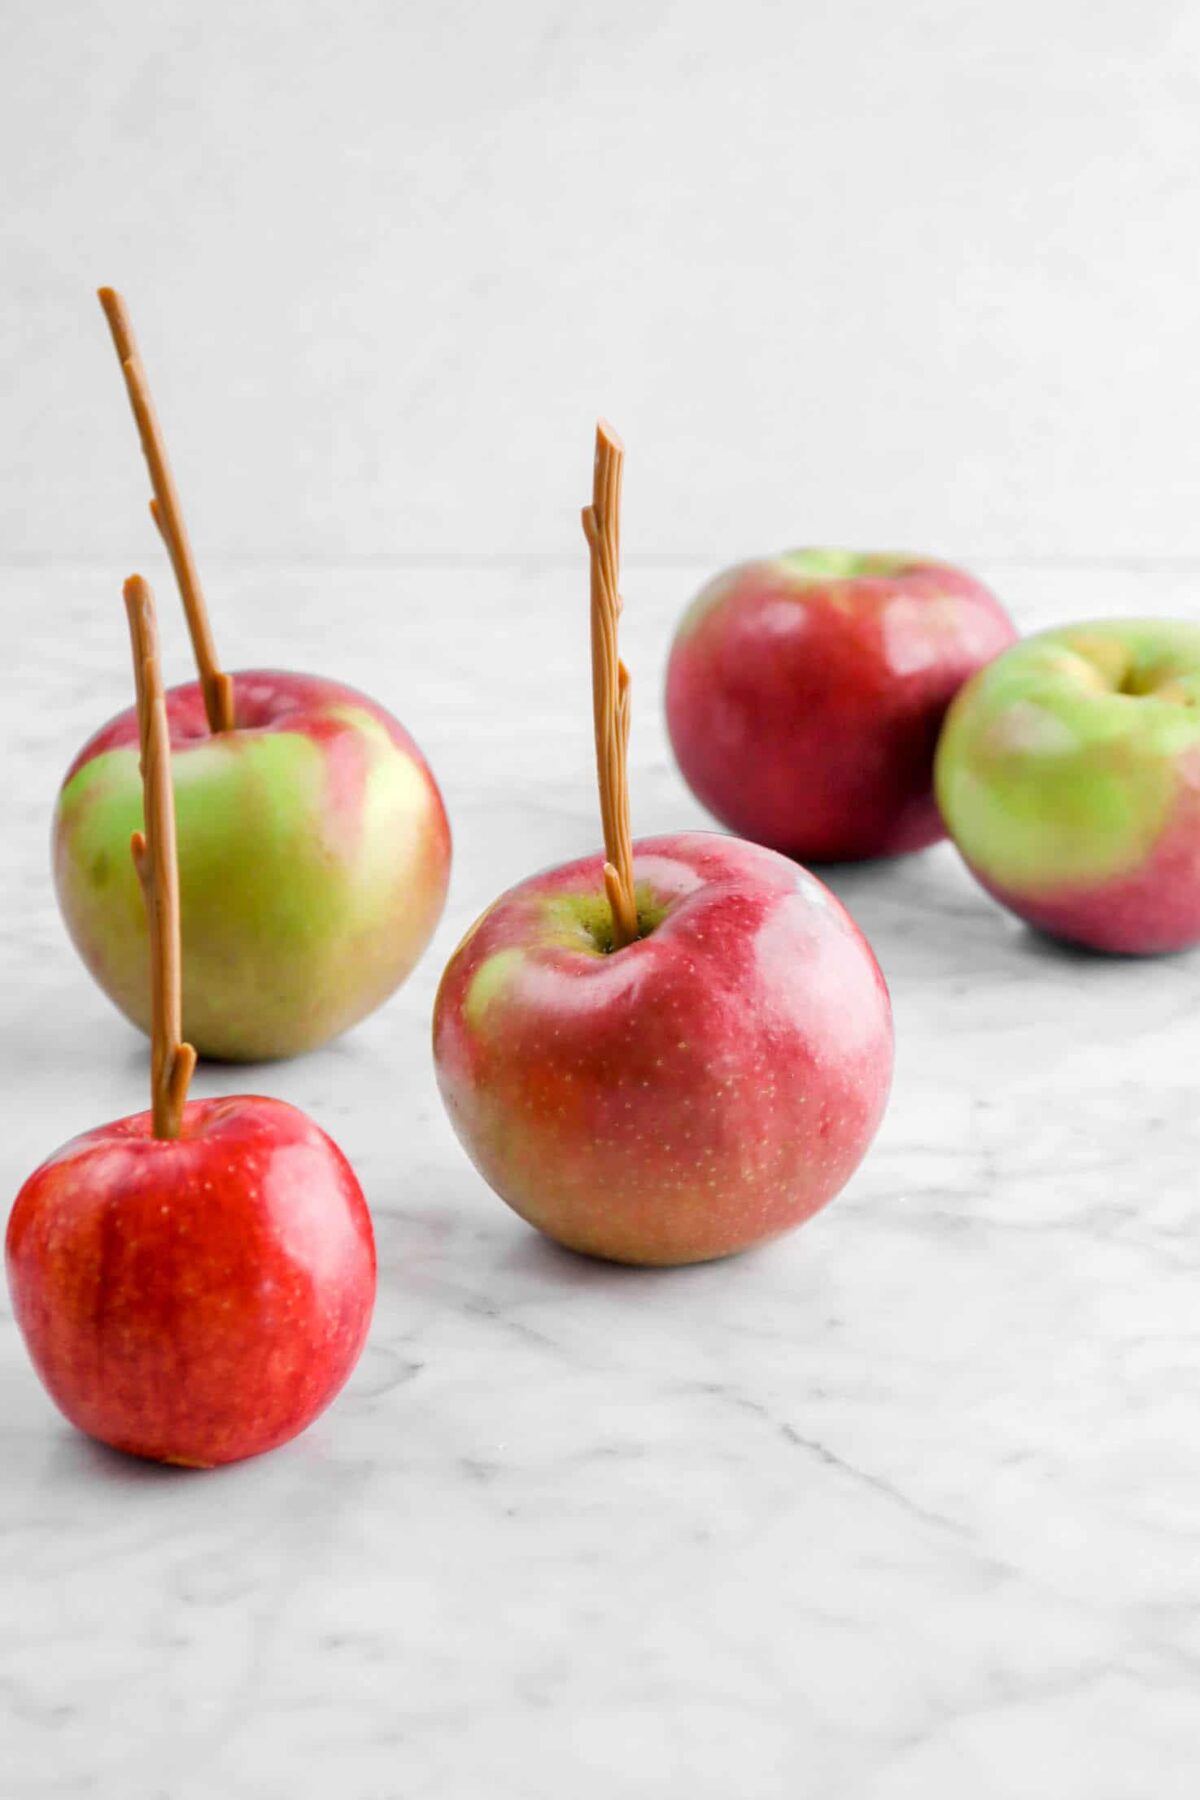 apples on marble counter with sticks in them